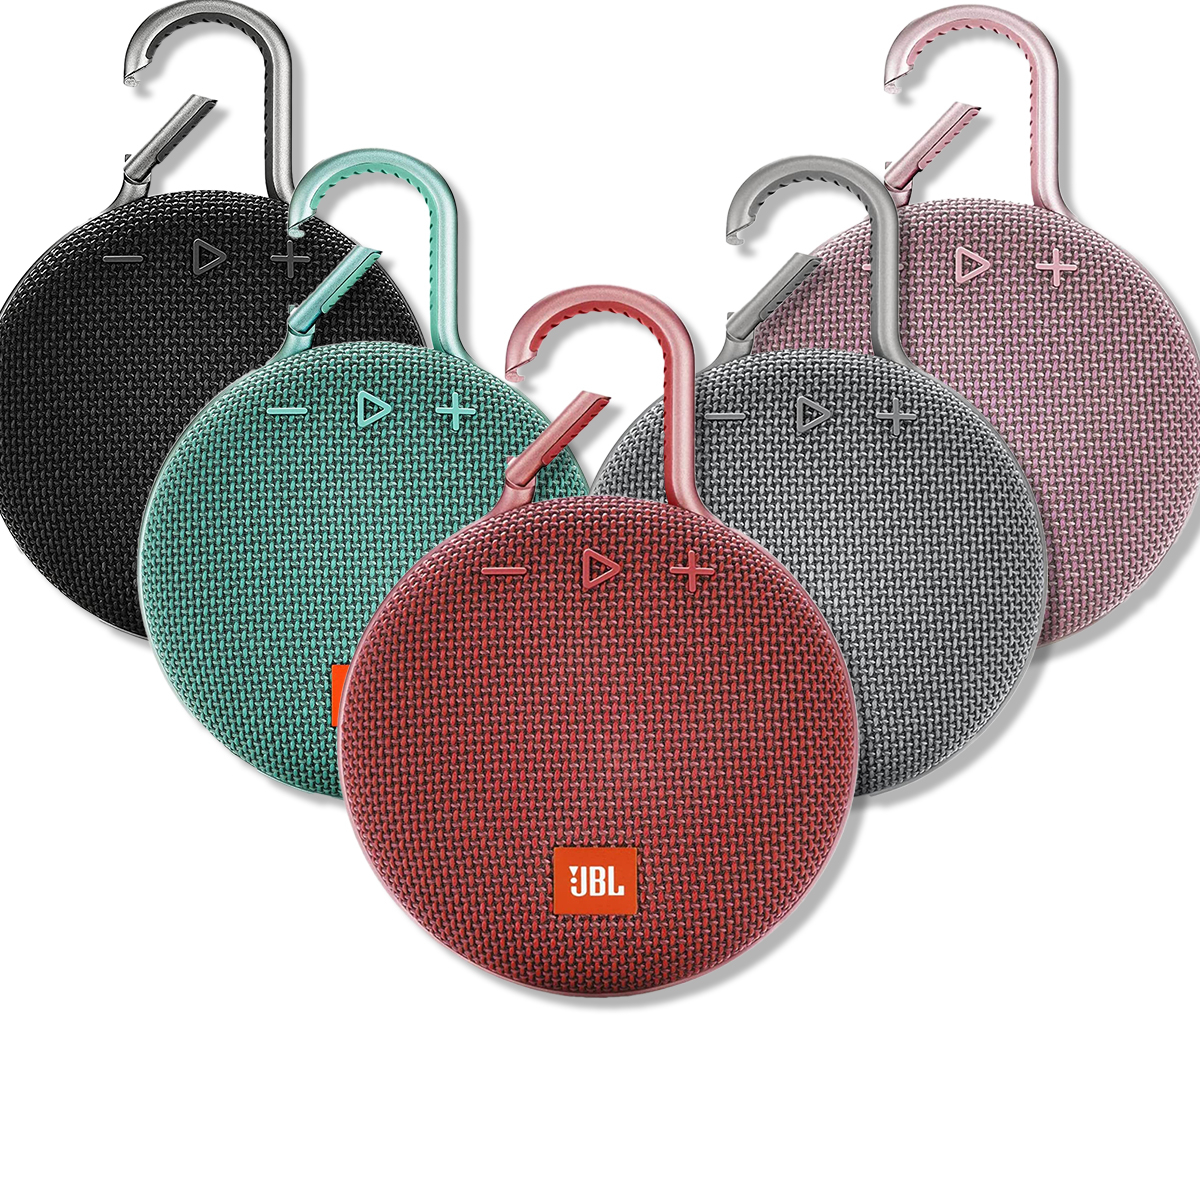 JBL Clip 4 review: A great-sounding travel speaker